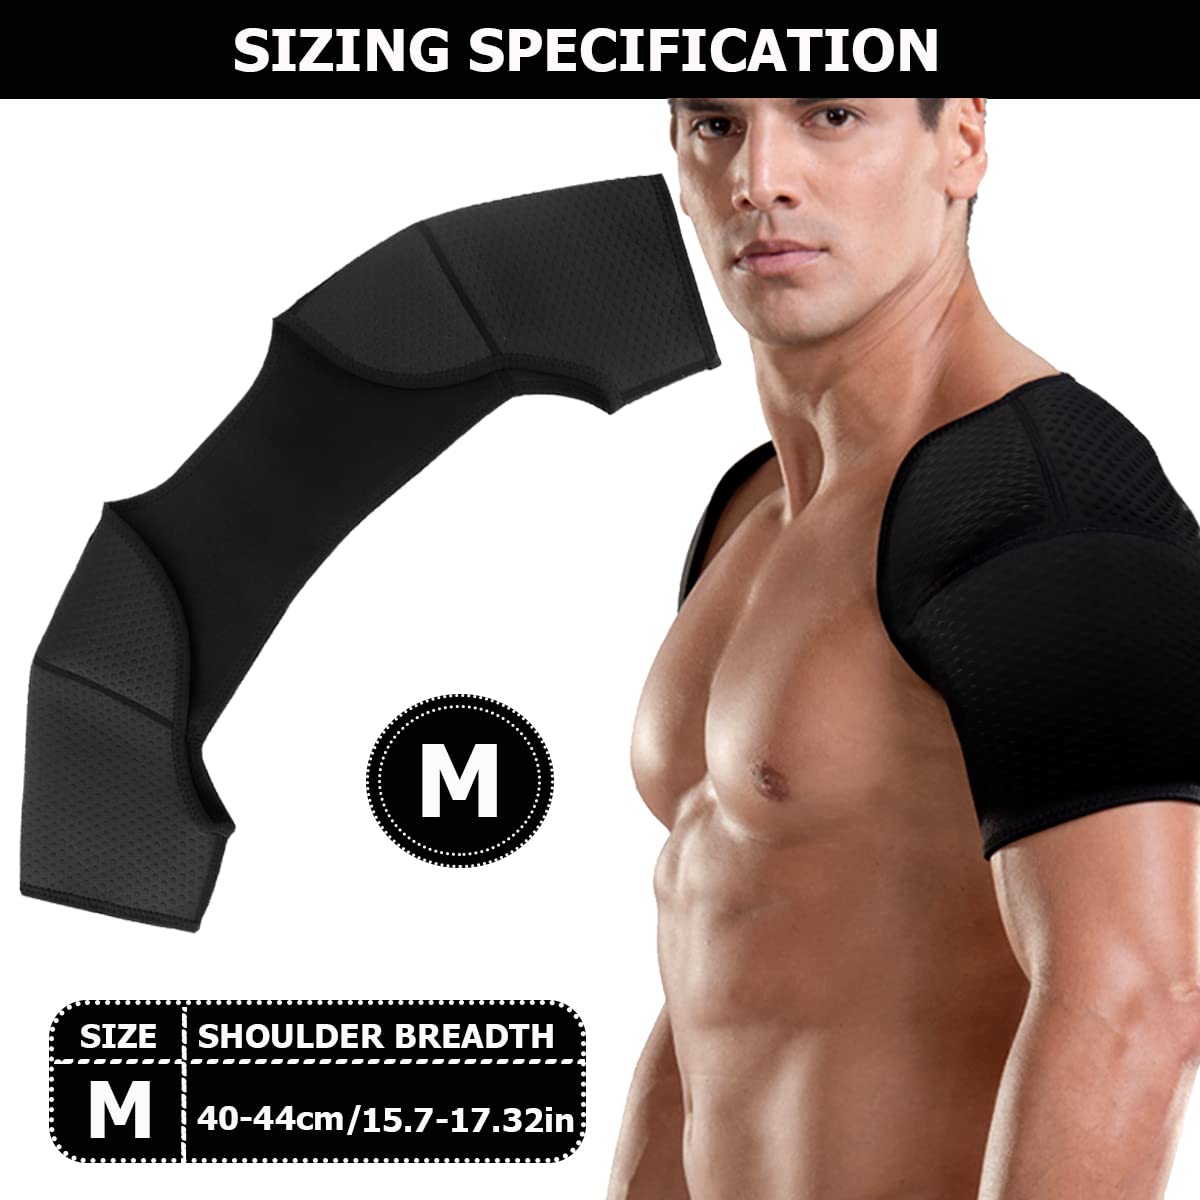 Double Shoulder Brace, Durable and Comfortable Double Shoulder -Breathable Sports Protective Gear for Chronic Tendinitis Pain Relief, Shoulder Strap Brace for Sleeping Outdoor Lifting Sports